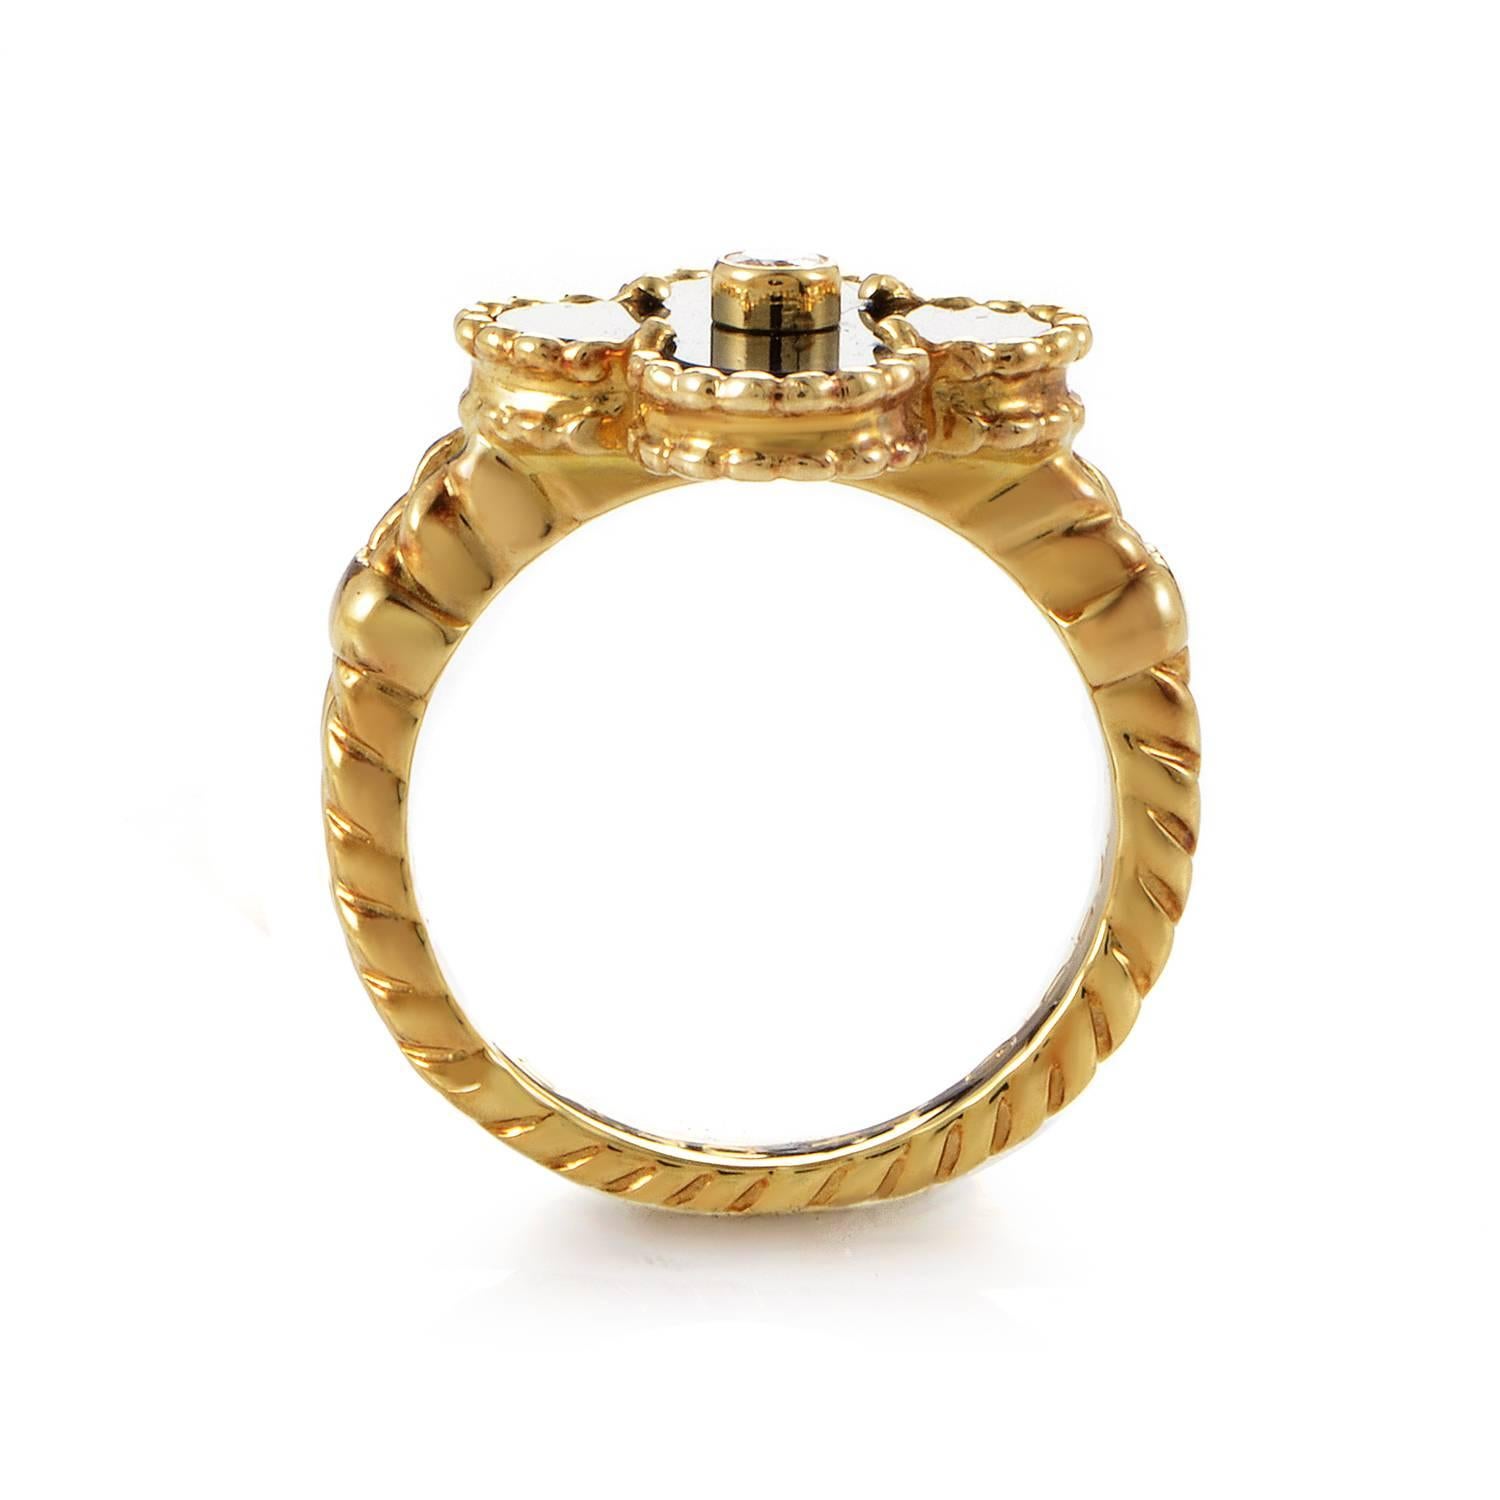 Fortune and luxury exude a pronounced presence in this fine design from Van Cleef & Arpels. 18K yellow gold is spun into twin arcing ropes. The trejectory of the band's detailed strength and texture leads to a summit of onyx pooling neatly into the